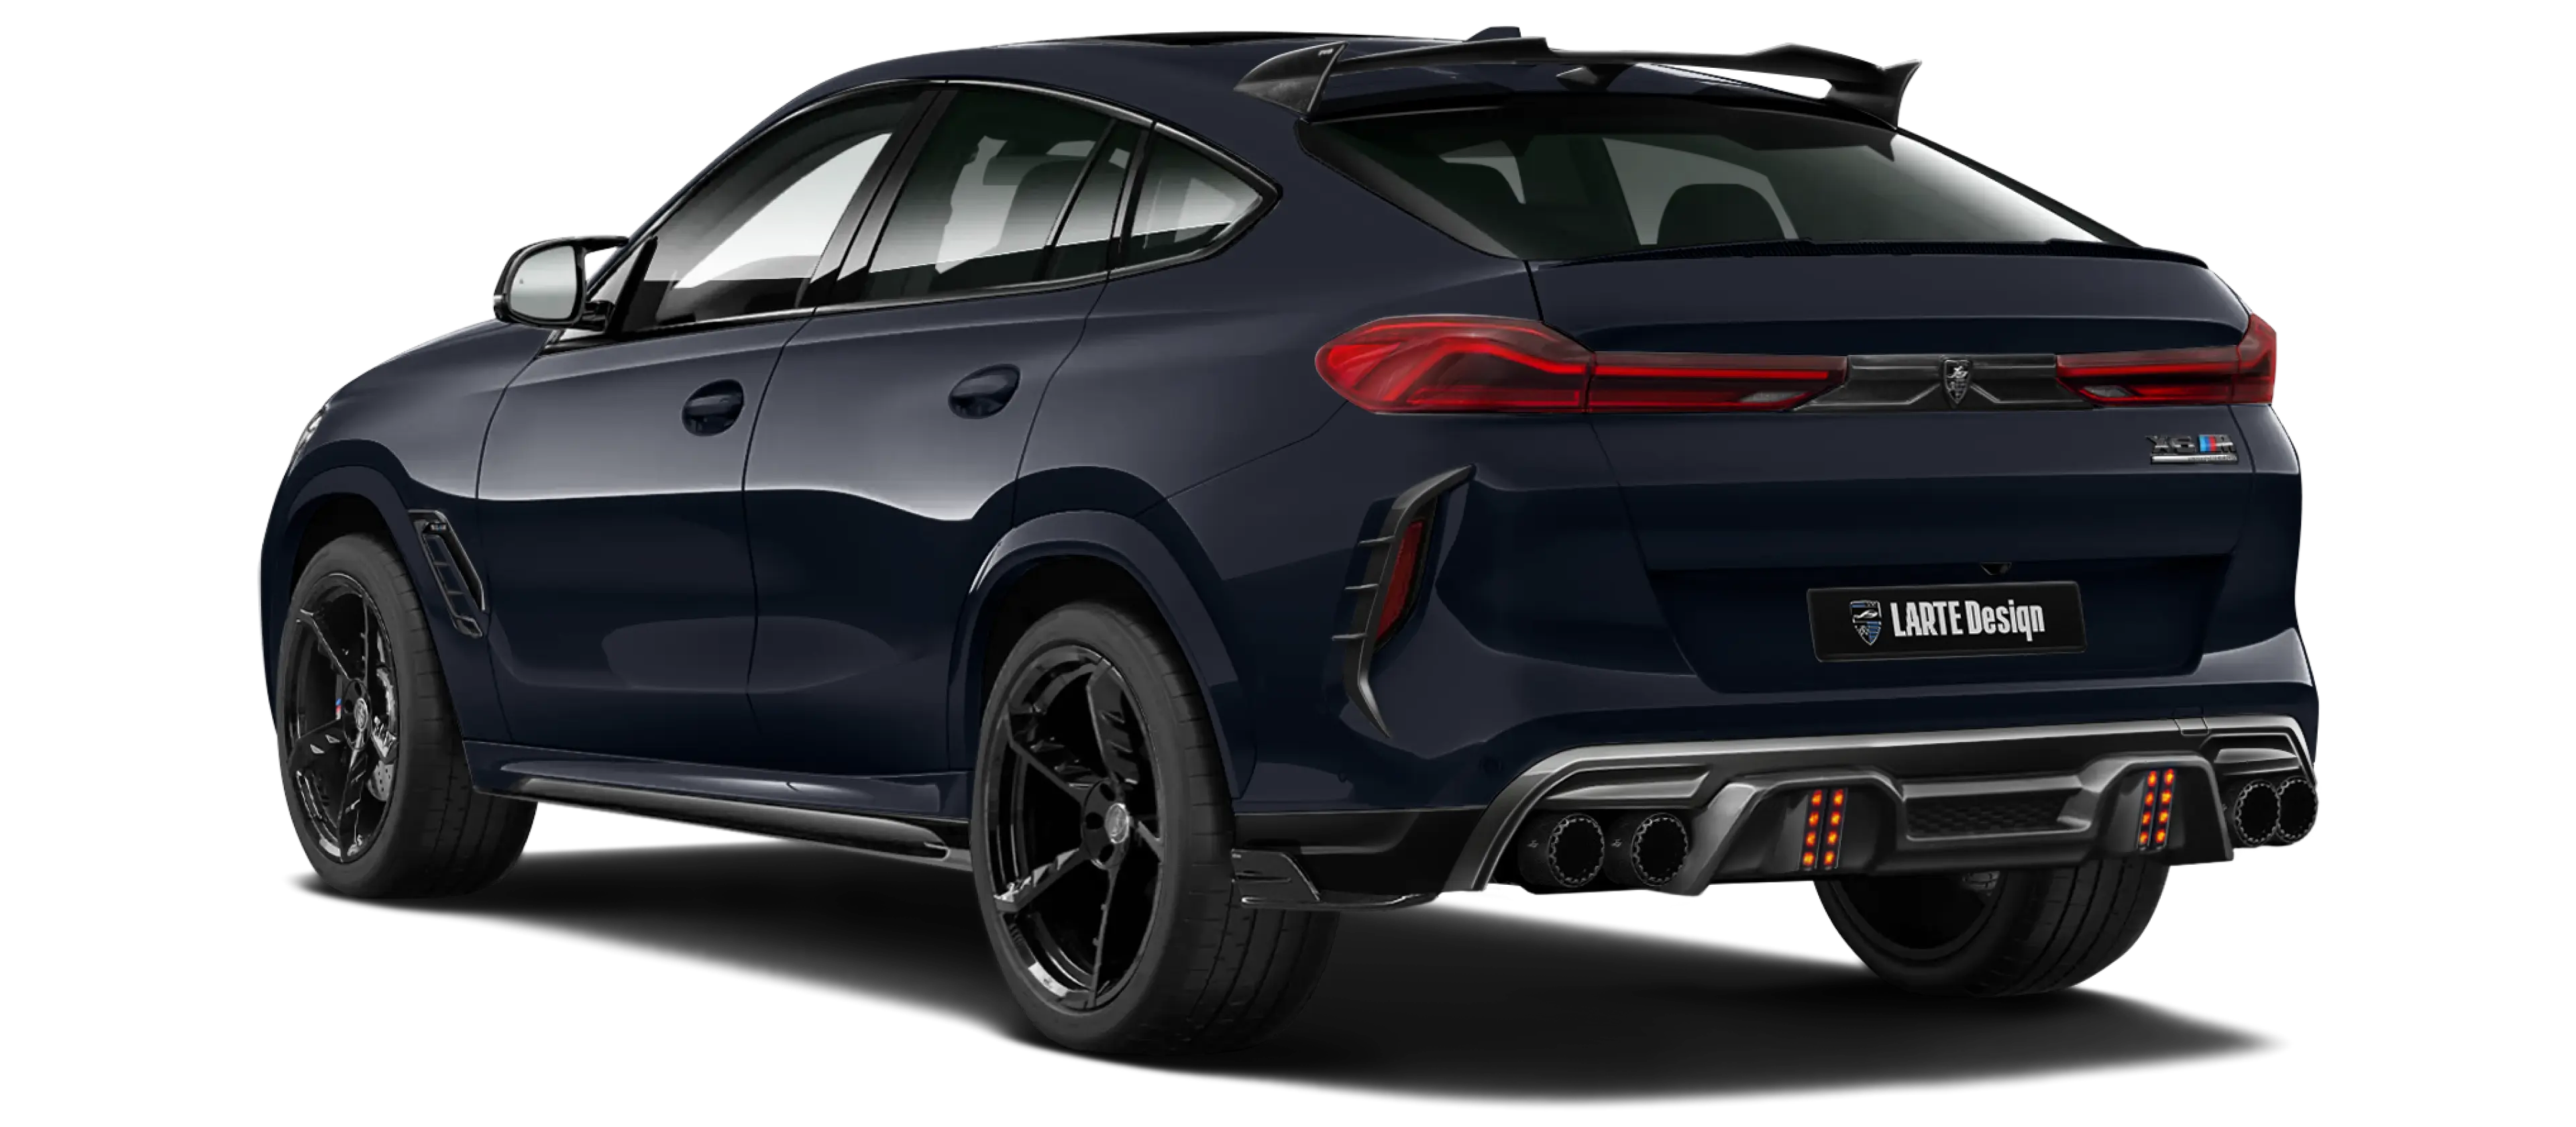 BMW X6M F96 LCI 2023 with painted body kit: rear view shown in Black carbon